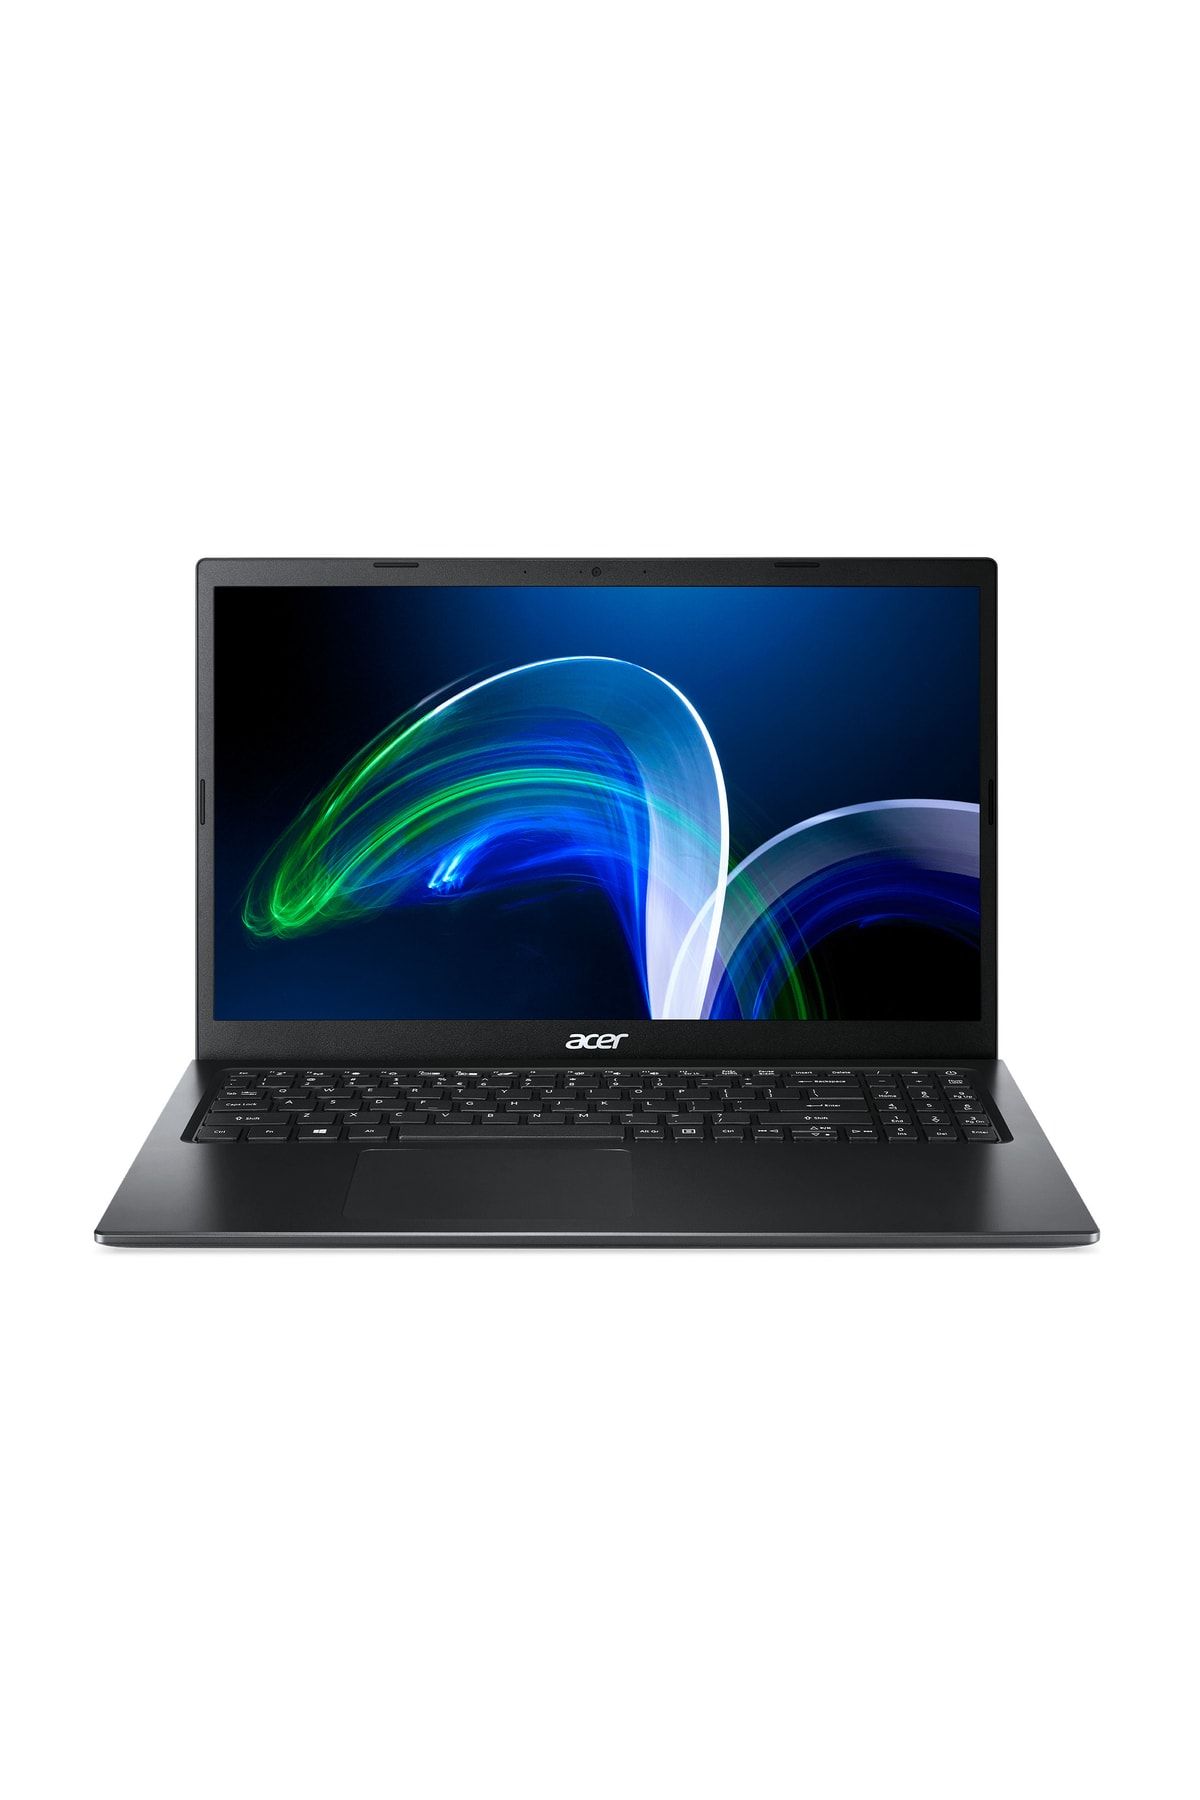 ACER Extensa 15 Ex215-54-57kw Nx.egjey.006 I5-1135g7 16gb 512gb Ssd 15,6'' Fhd Freedos Notebook